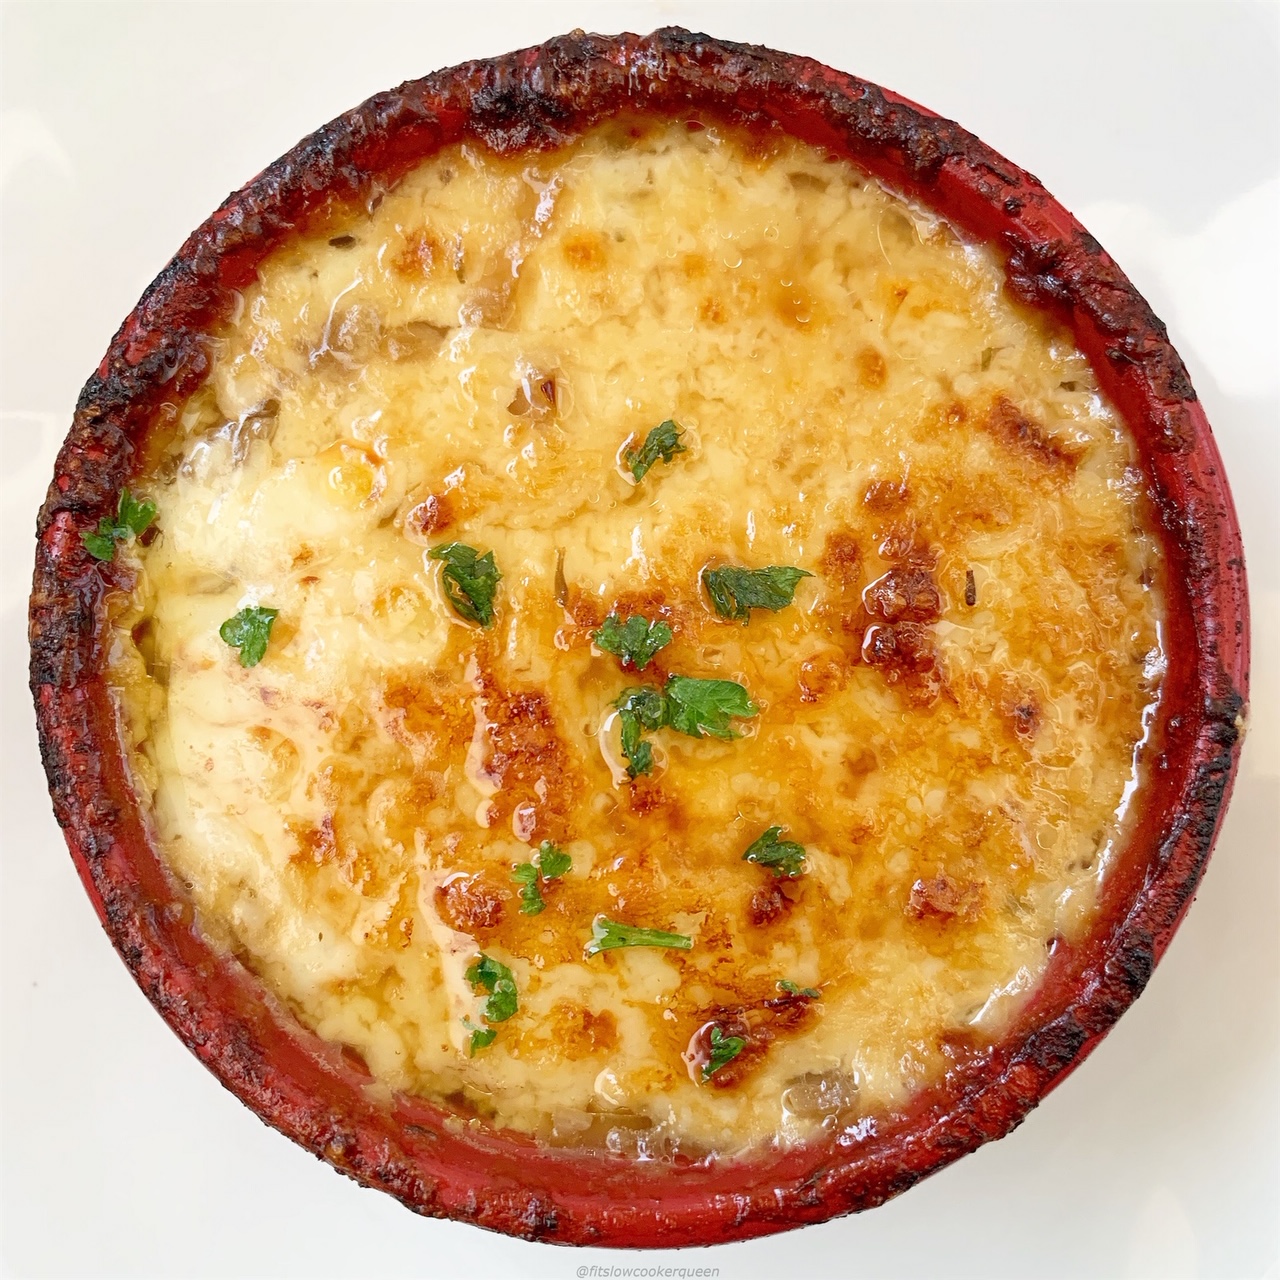 This low-carb version of French onion soup is cheesy and flavorful. Make this healthy yet comforting soup in your slow cooker or Instant Pot.